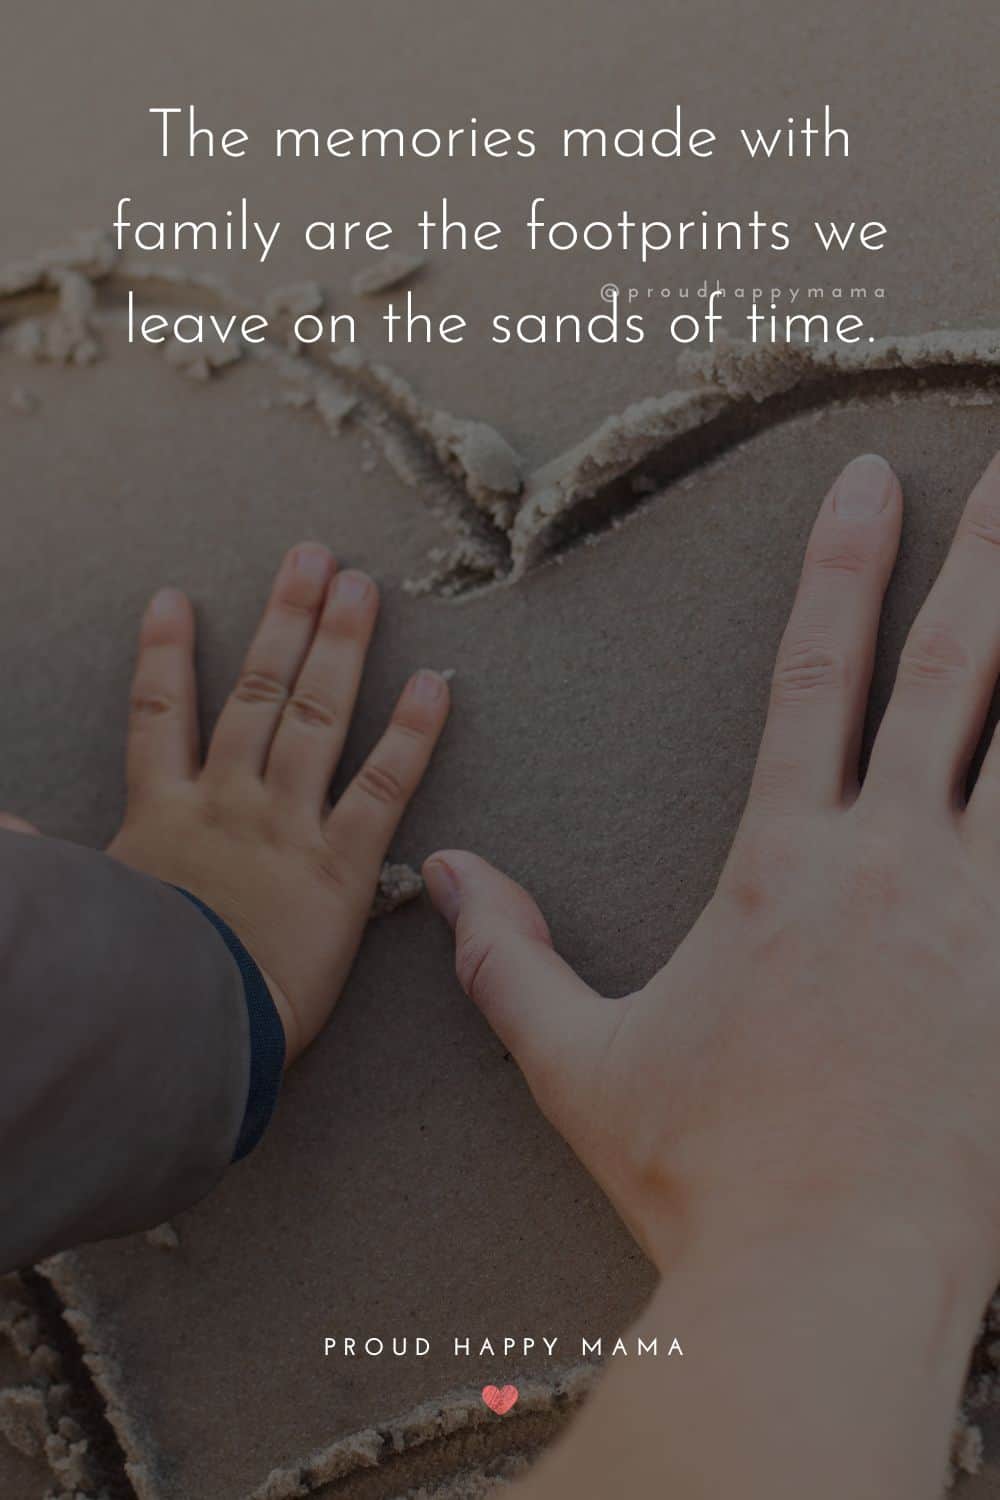 time with family quotes - The memories made with family are the footprints we leave on the sands of time.